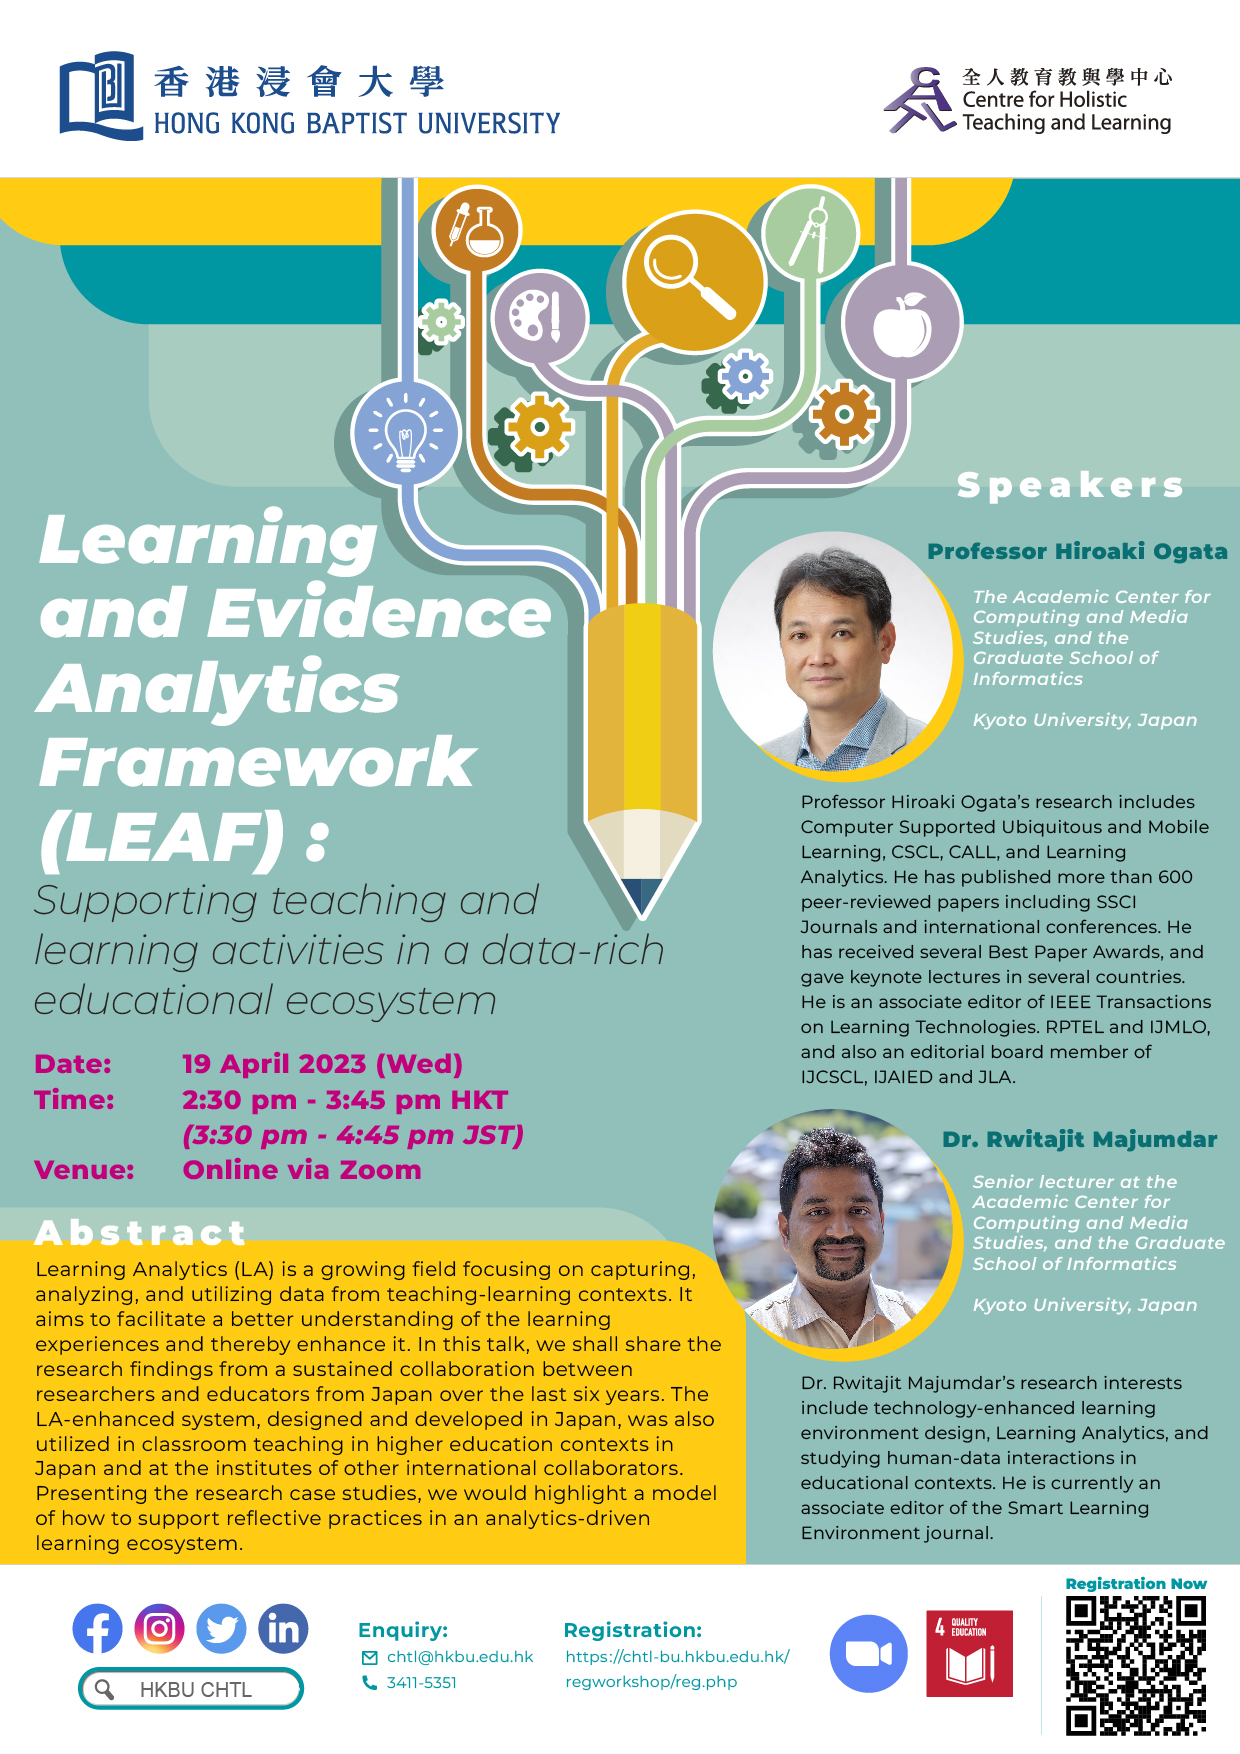 Learning and Evidence Analytics Framework (LEAF) : Supporting teaching and learning activities in a data-rich educational ecosystem